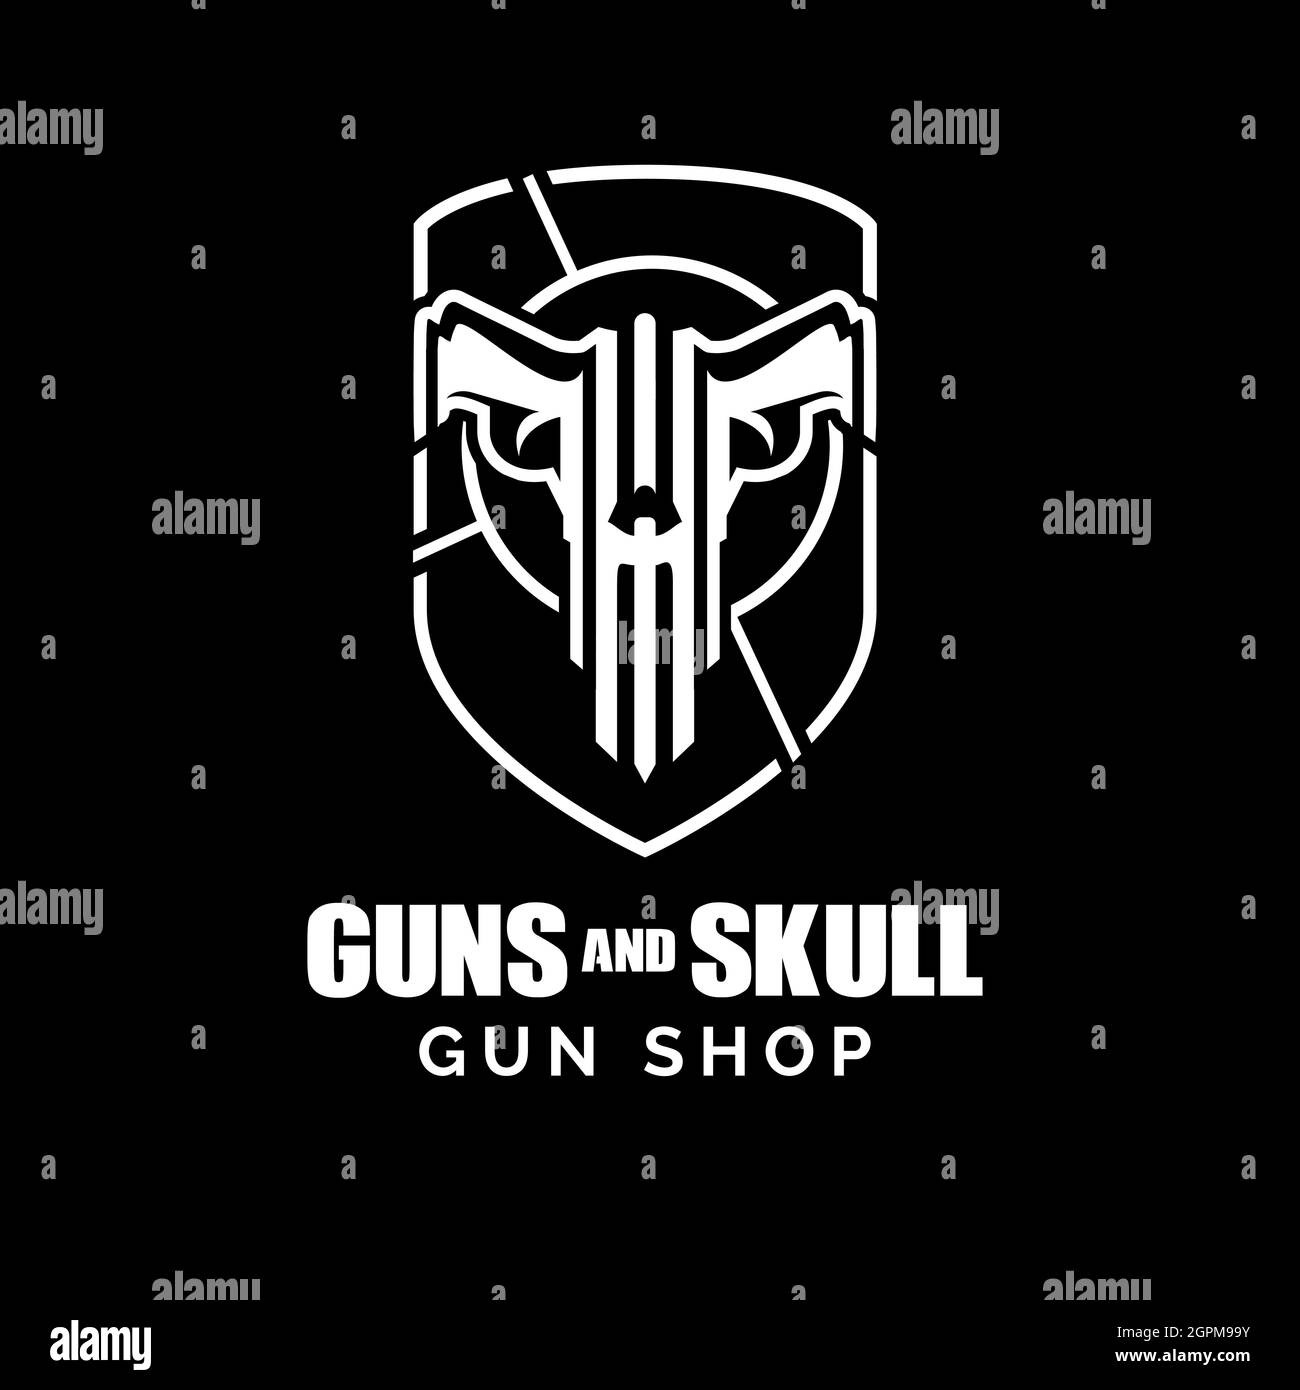 Guns and Skull concept a unique and strong symbol vector. can be used for tshirt print, gun shop, team logo, or any other purpose. Stock Vector